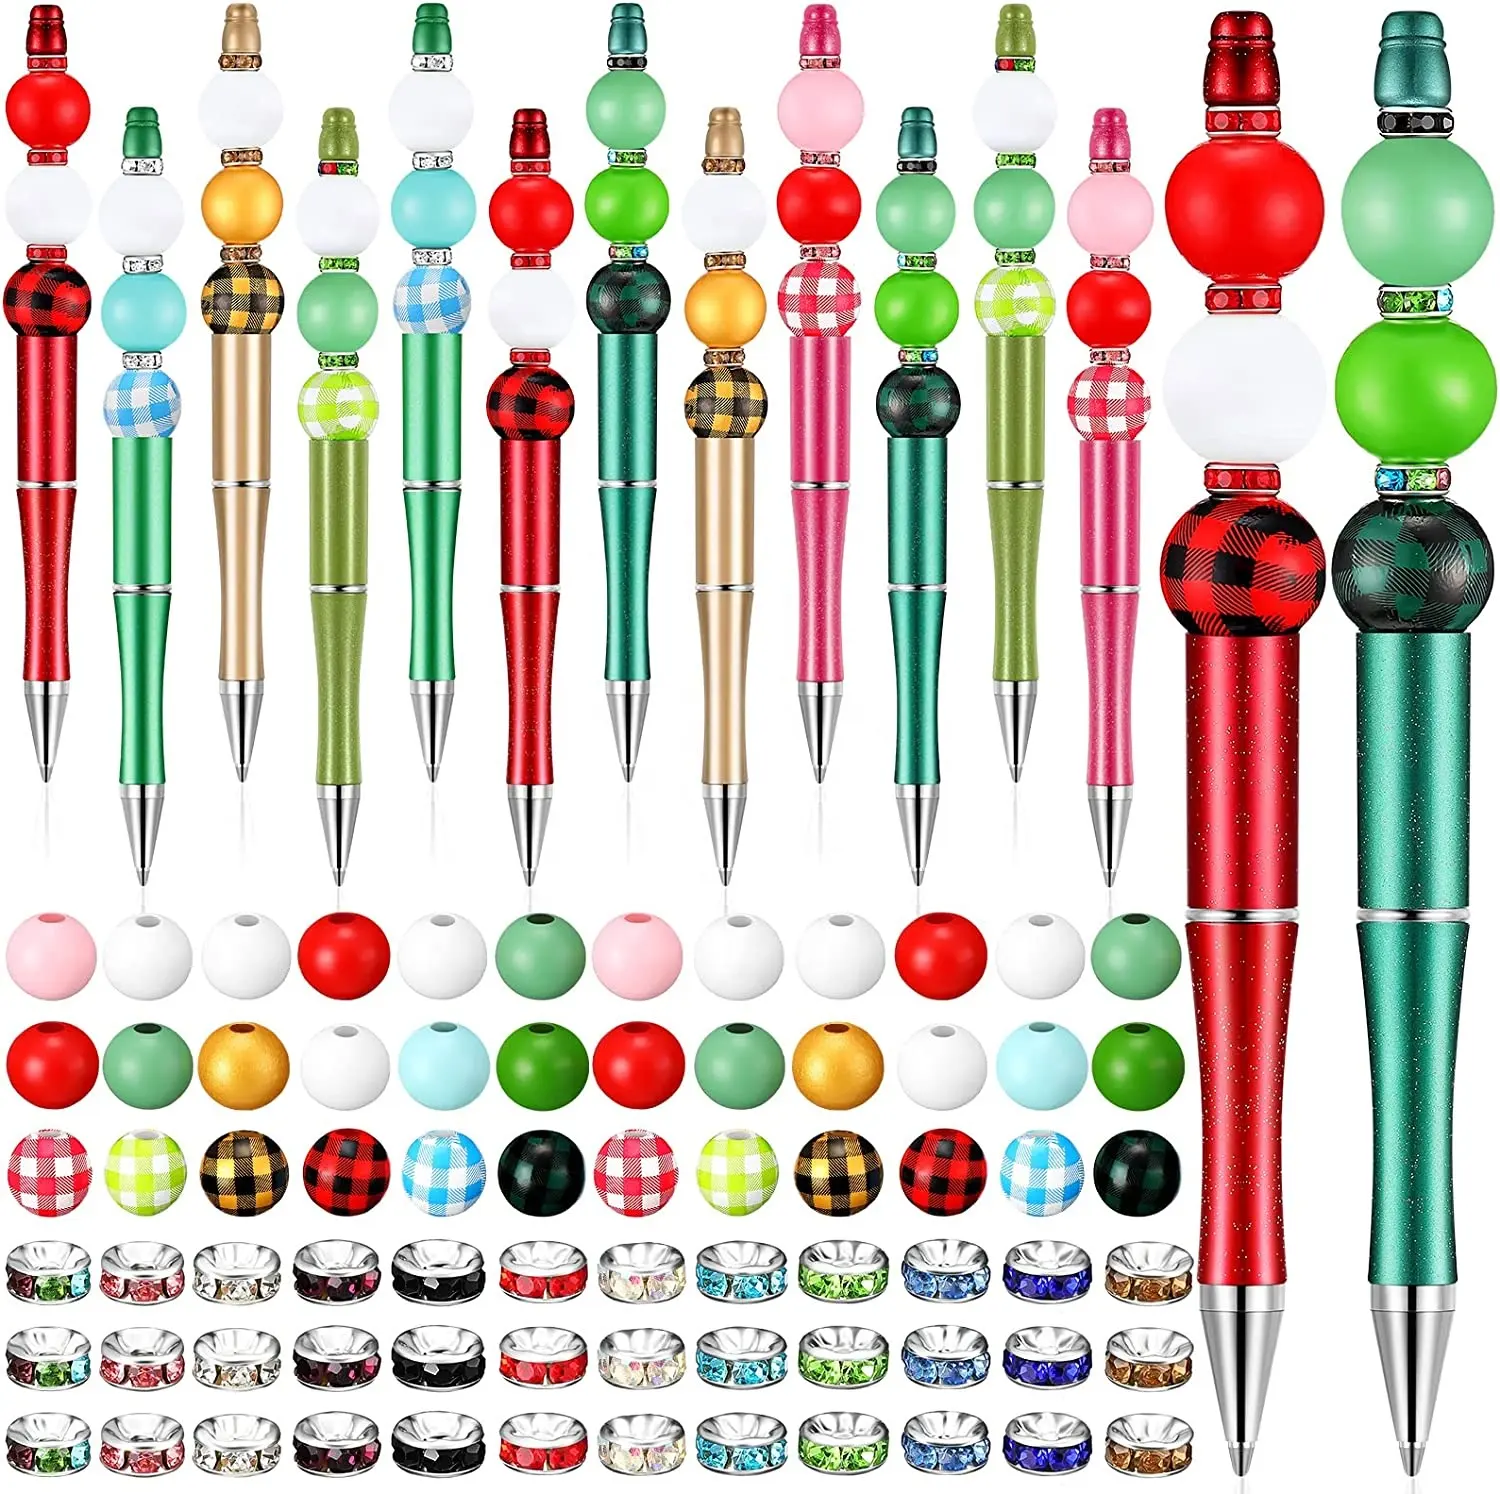 USA Top Selling DIY Jewelry Decorative Making Gift Kids Students Office School Supplies Plastic Beadable Pen Bulk Beaded Pens